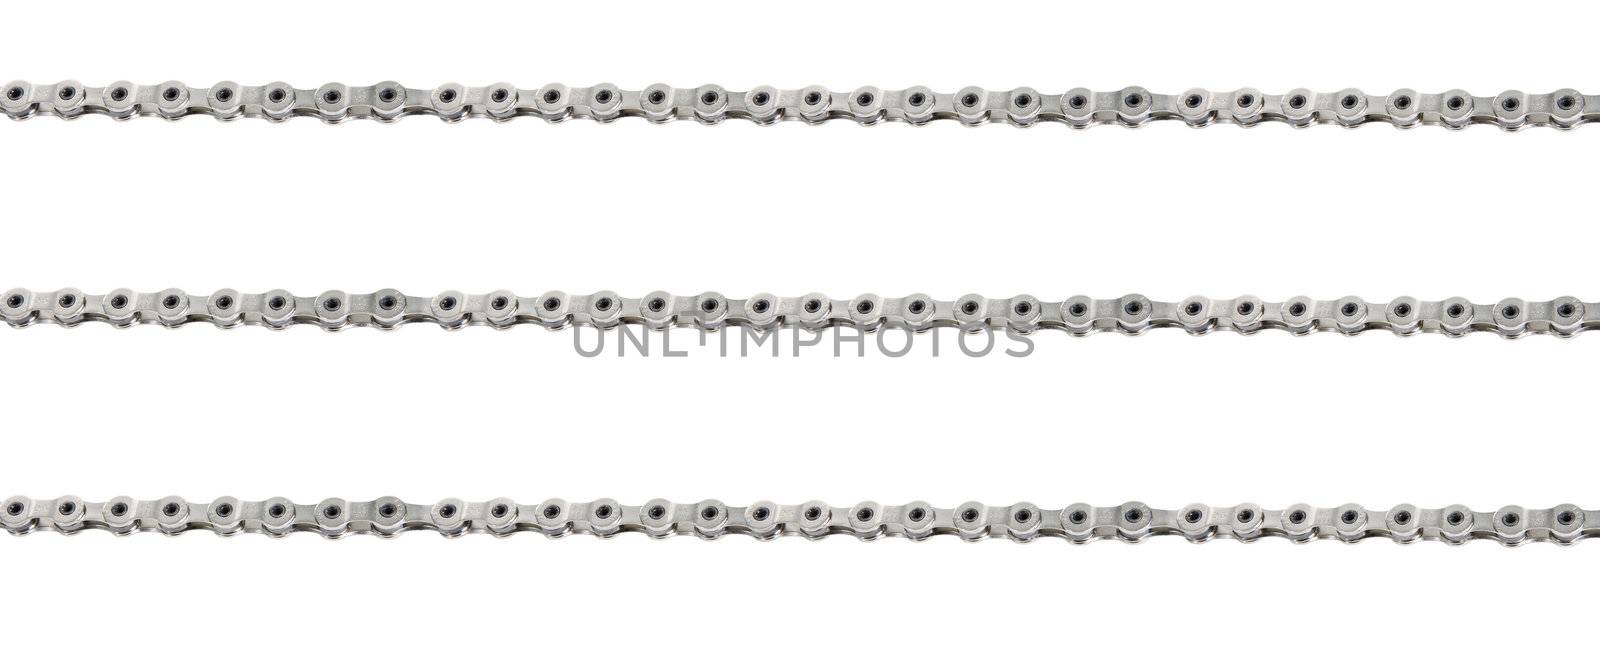 bicycle chains on white background